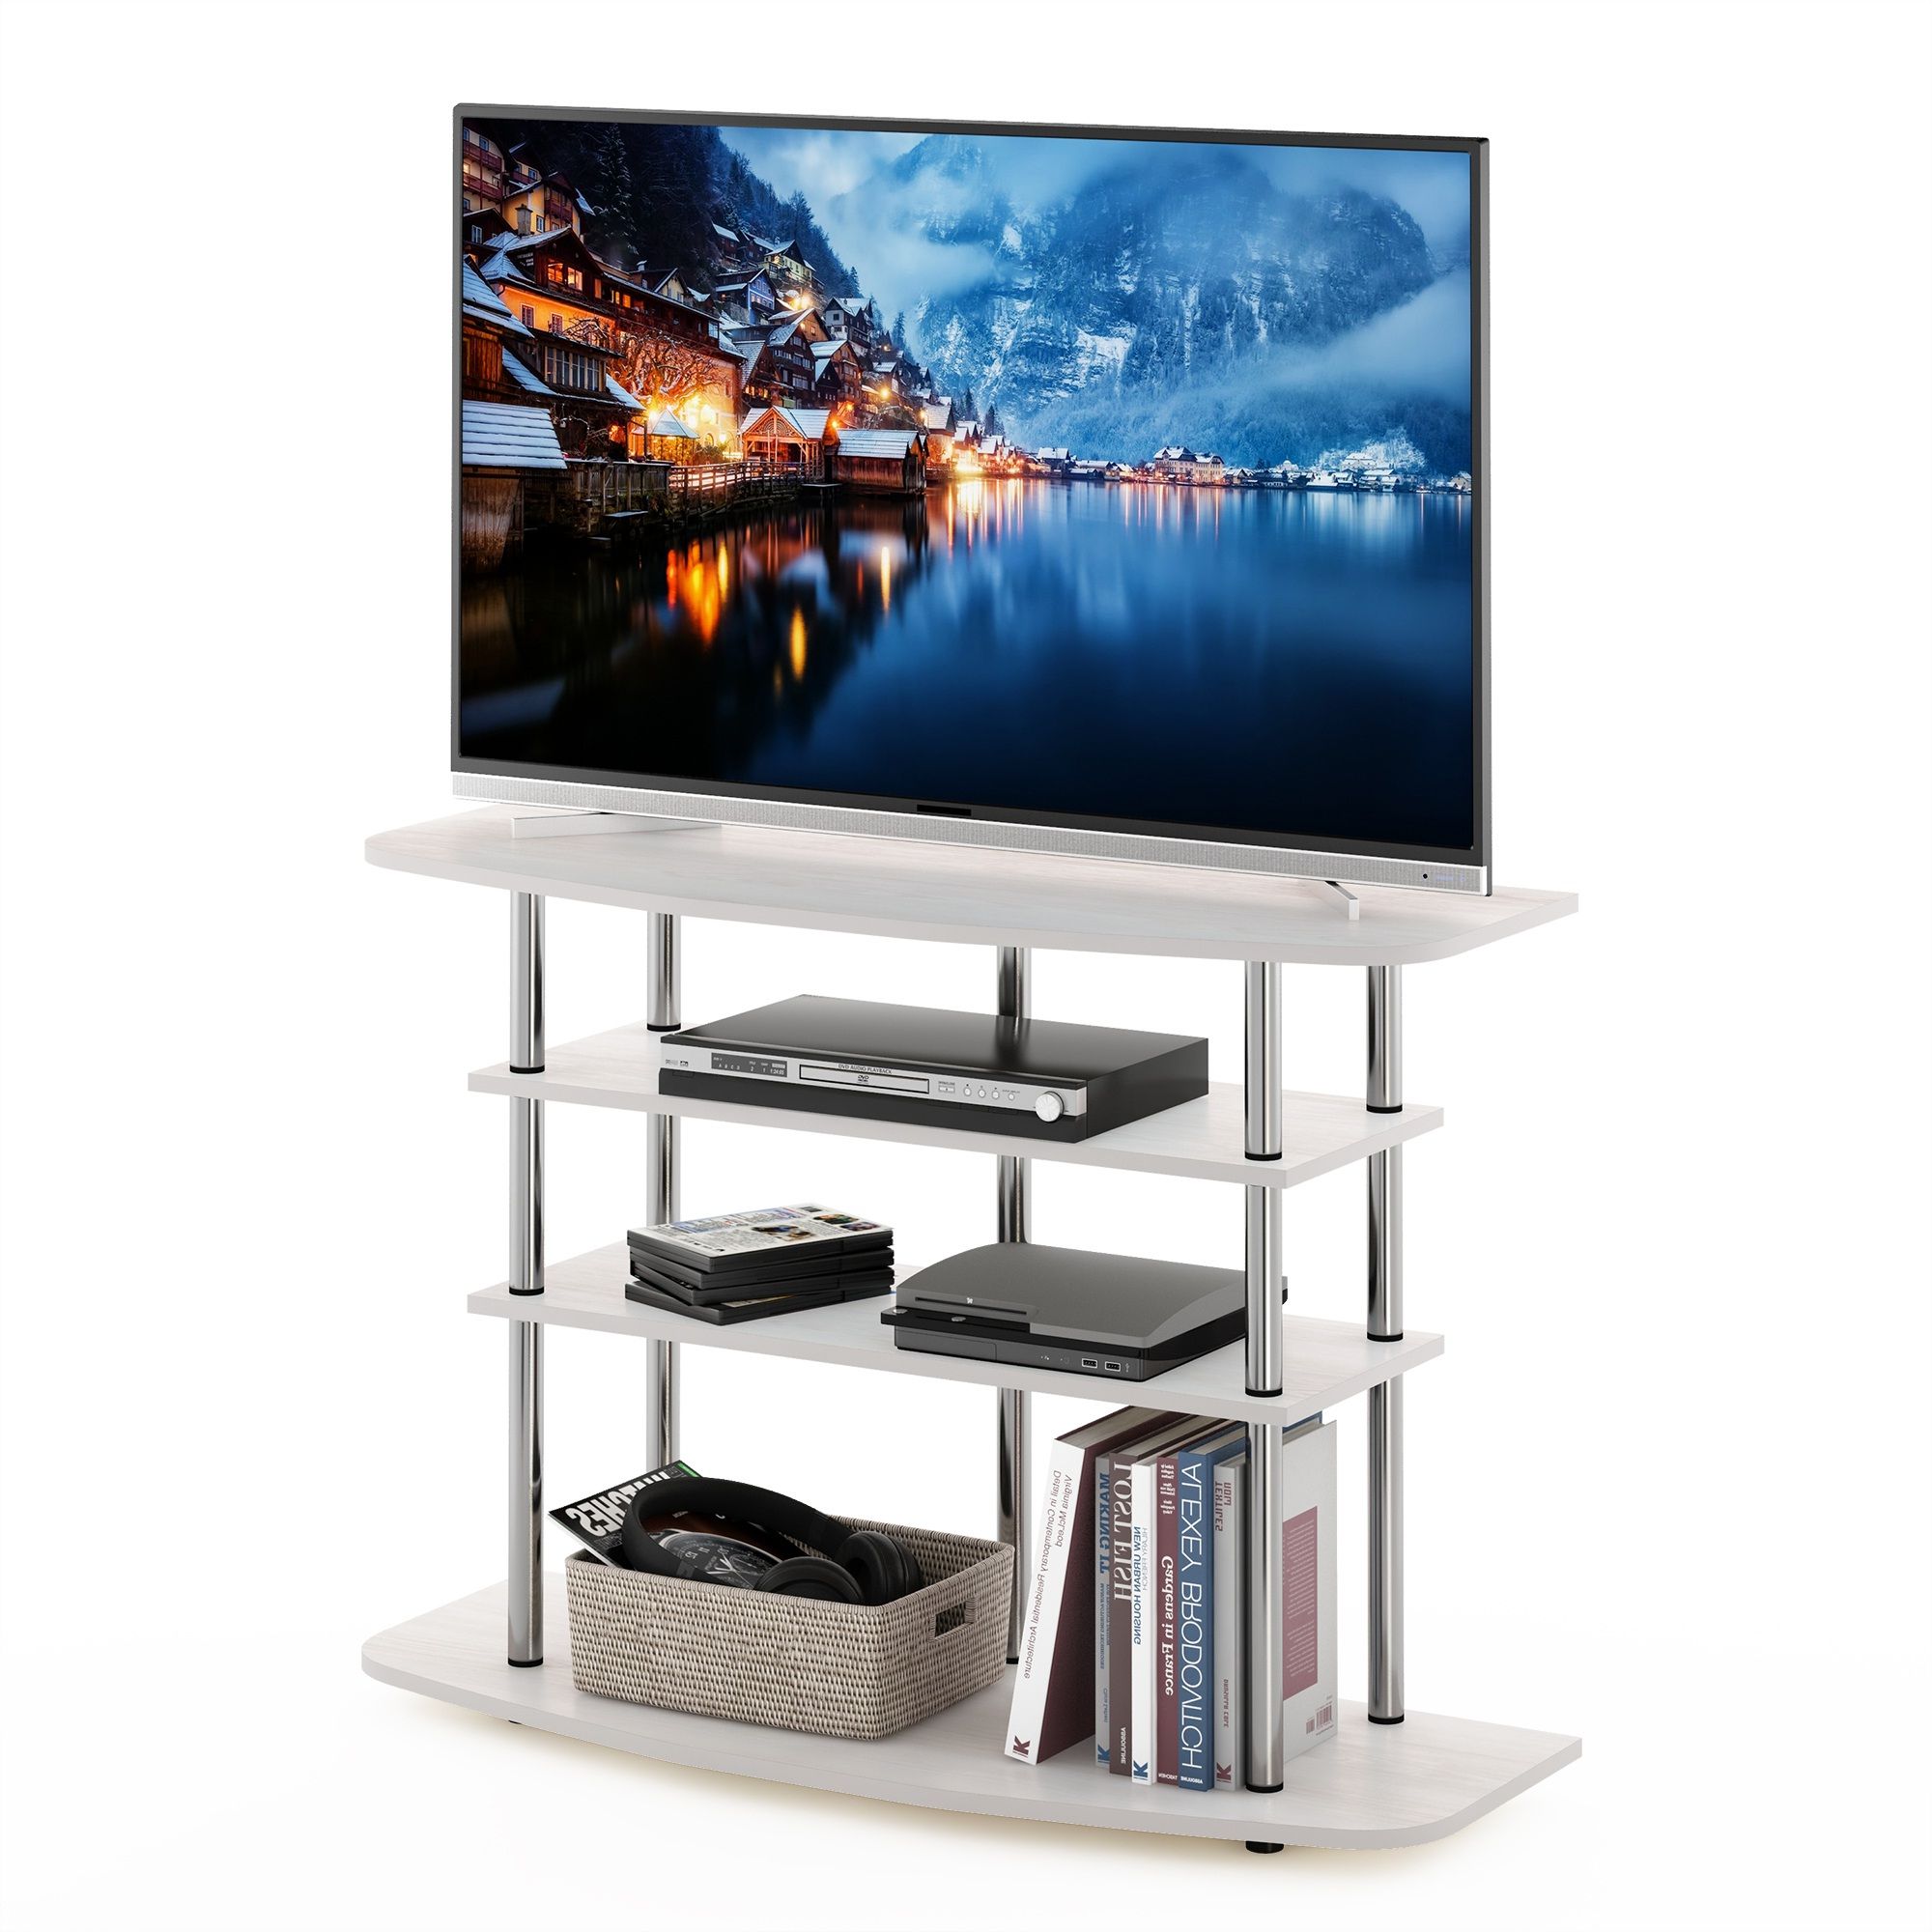 Furinno Frans Turn N Tube 4 Tier Tv Stand For Tv Up To 46 For Furinno Jaya Large Tv Stands With Storage Bin (View 9 of 20)